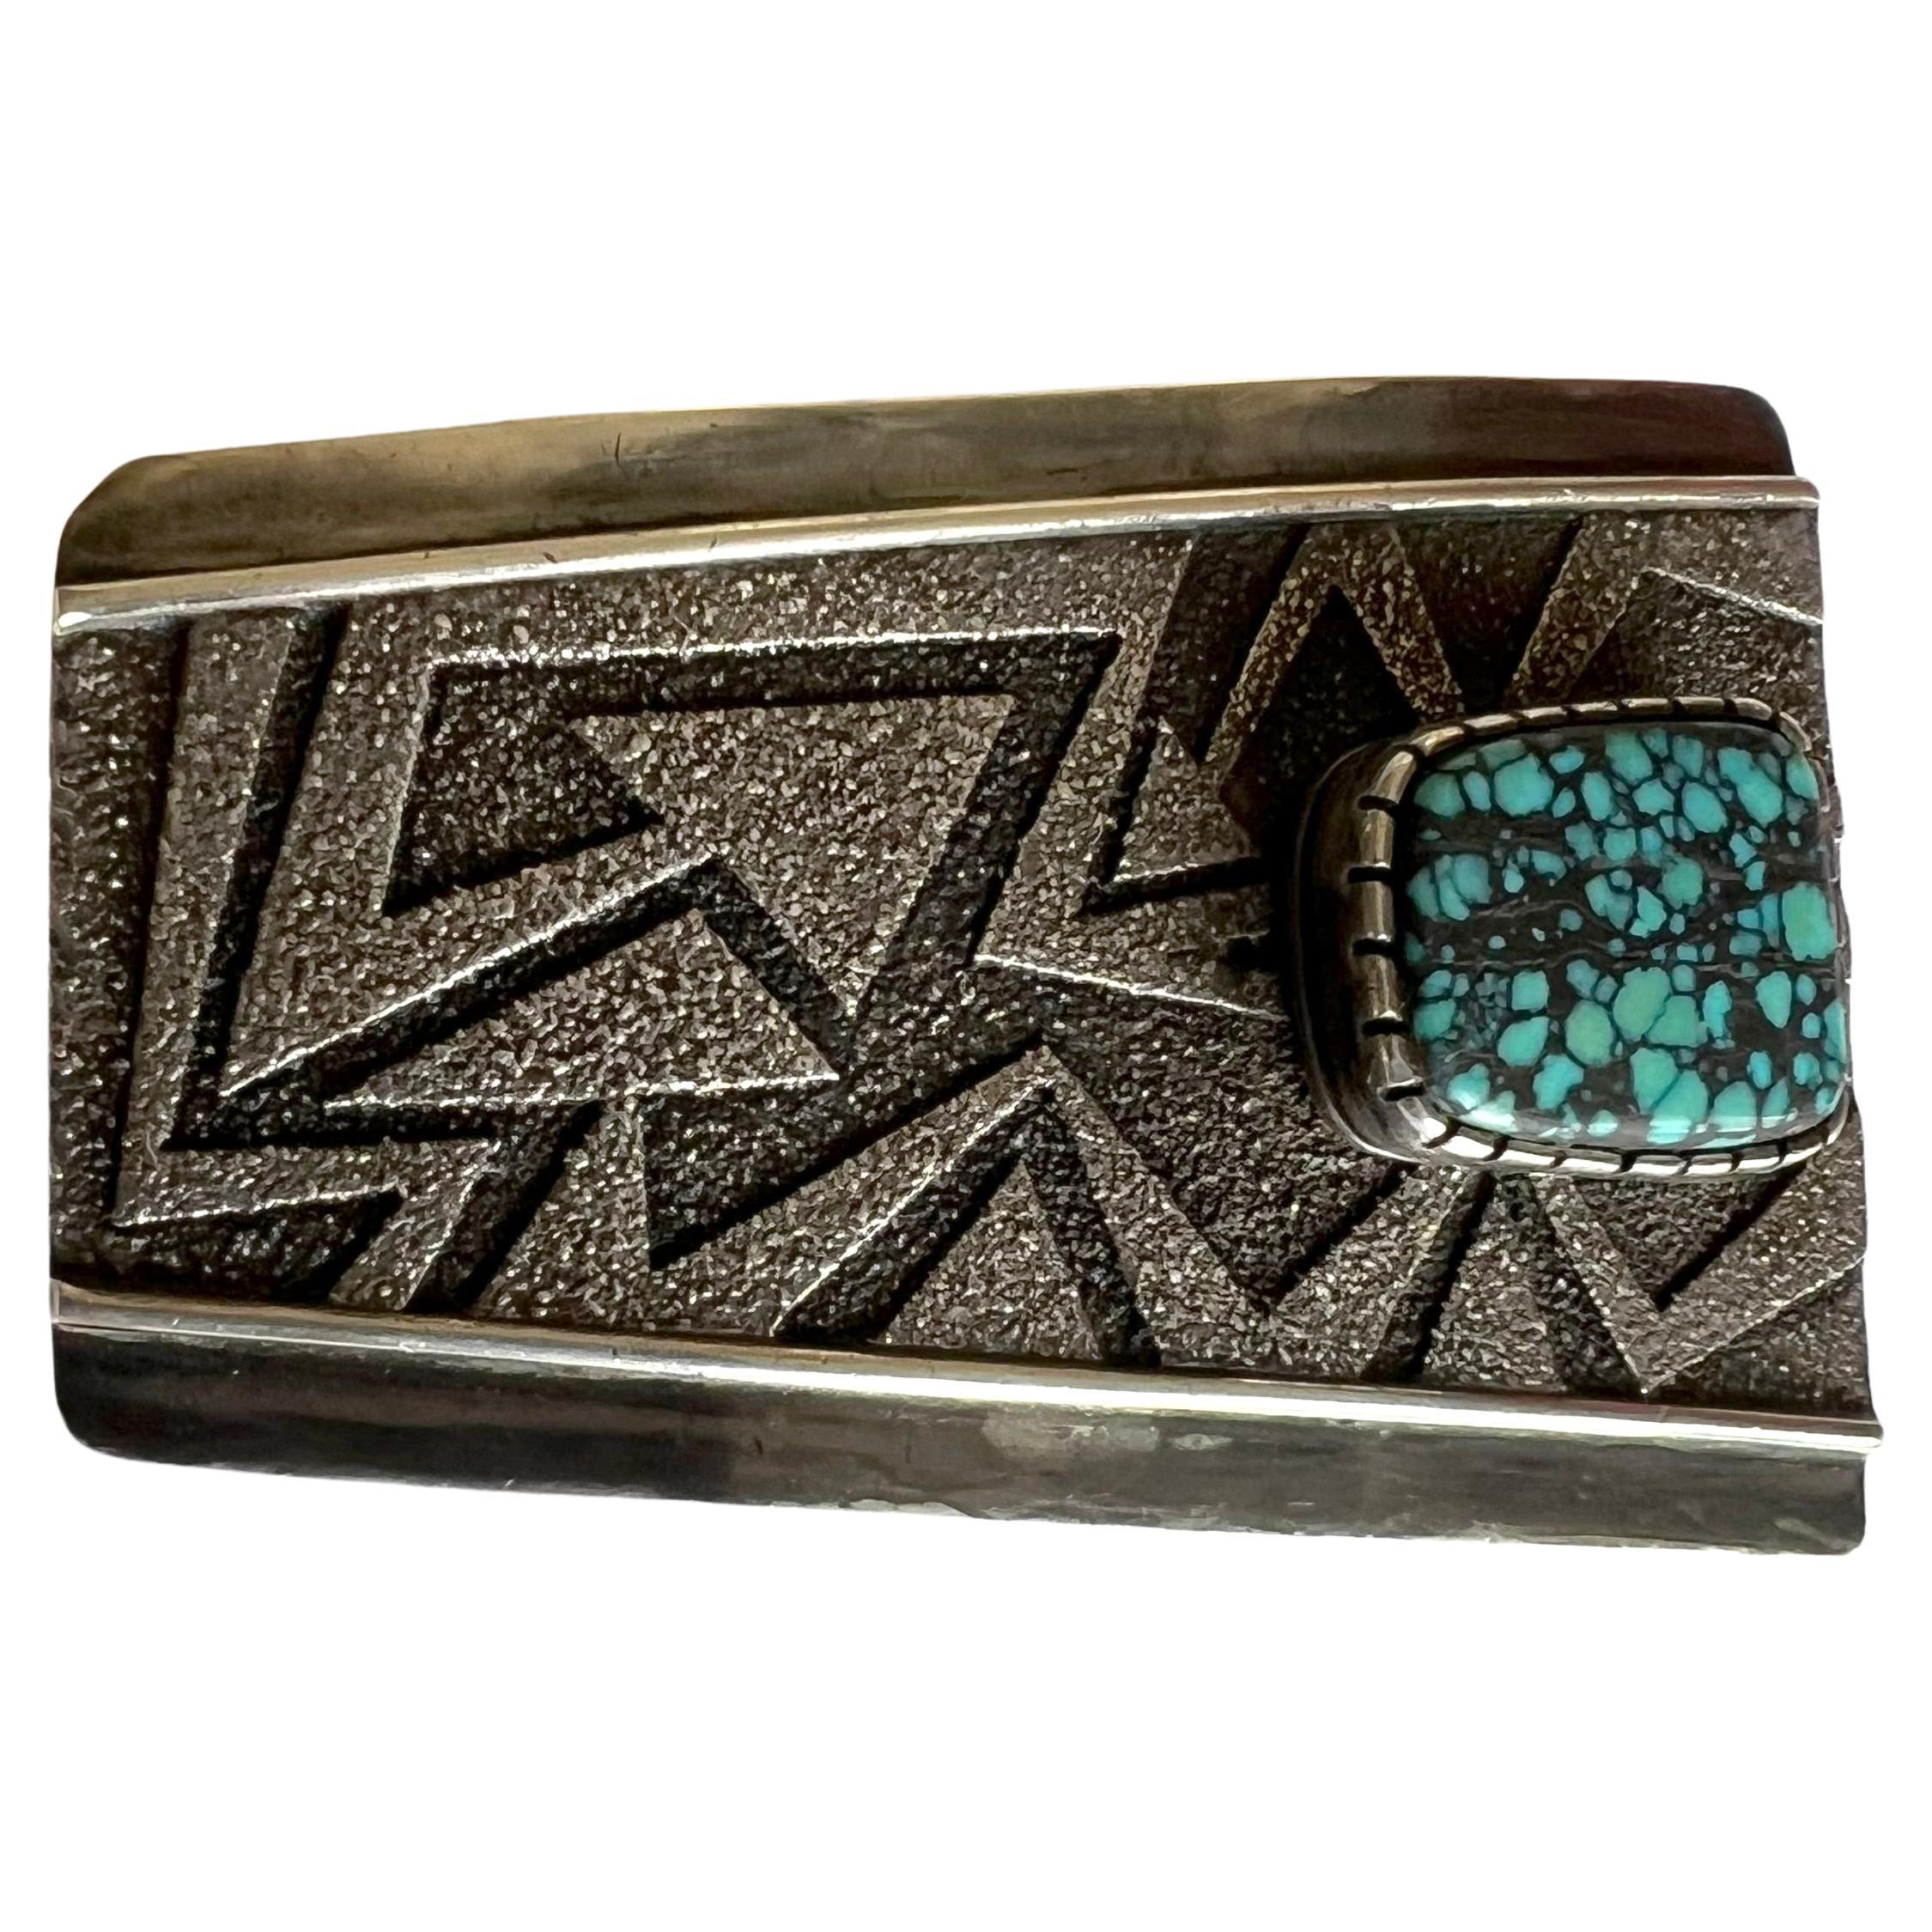 Tufa cast sterling silver with spiderweb turquoise stone created by Navajo jeweler Richard Tsosie. Buckle measures 2.25